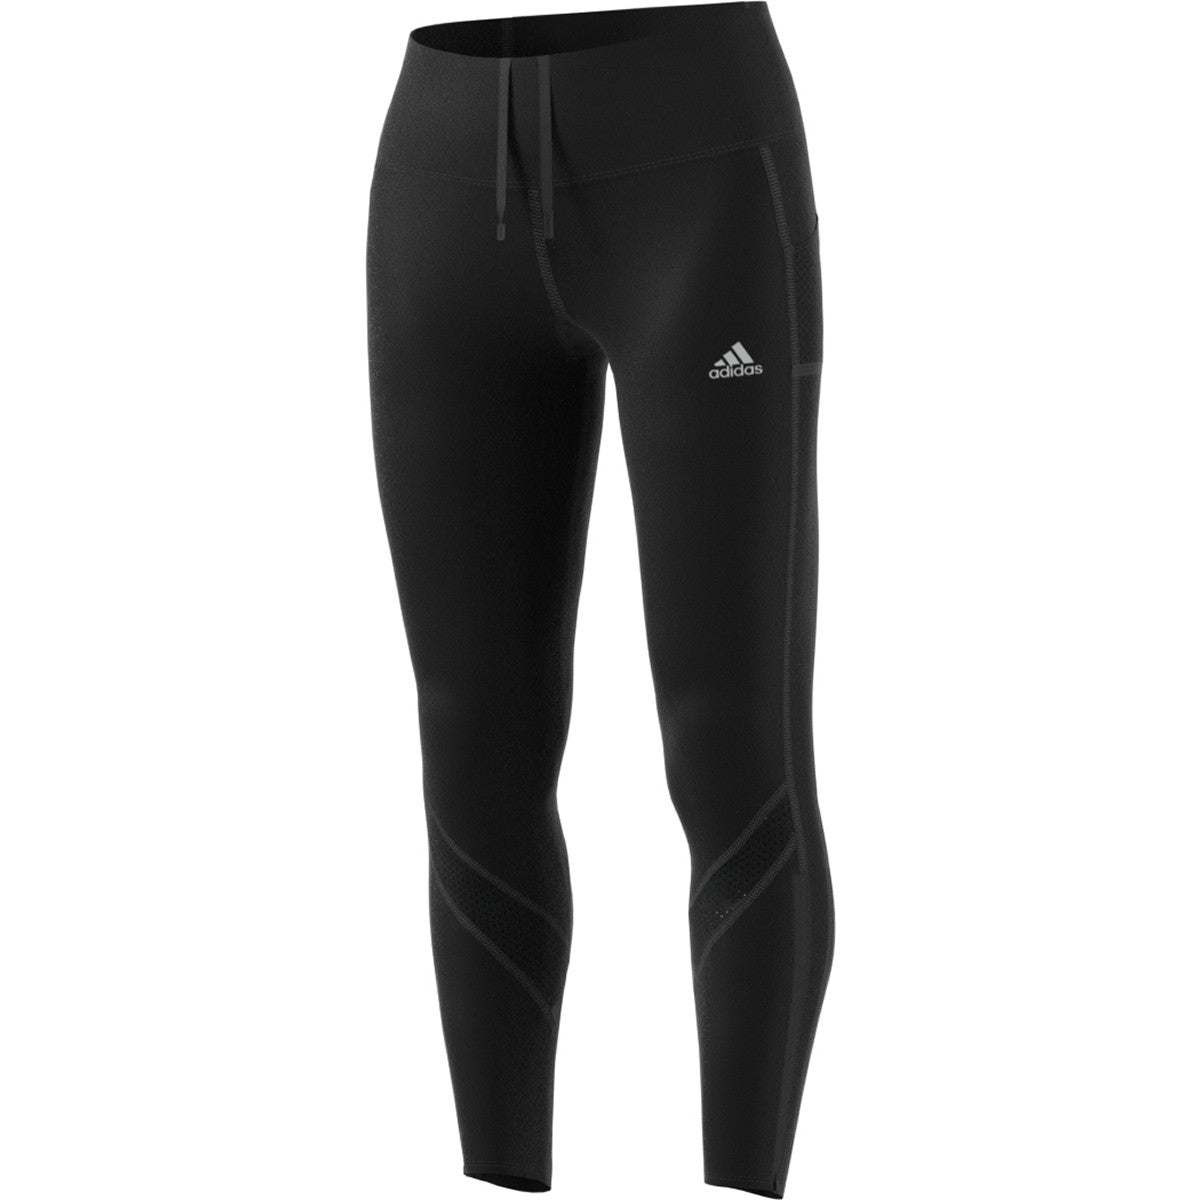 ADIDAS Women's Own the Run COLD.RDY Running Leggings NWT Black SIZE: LARGE